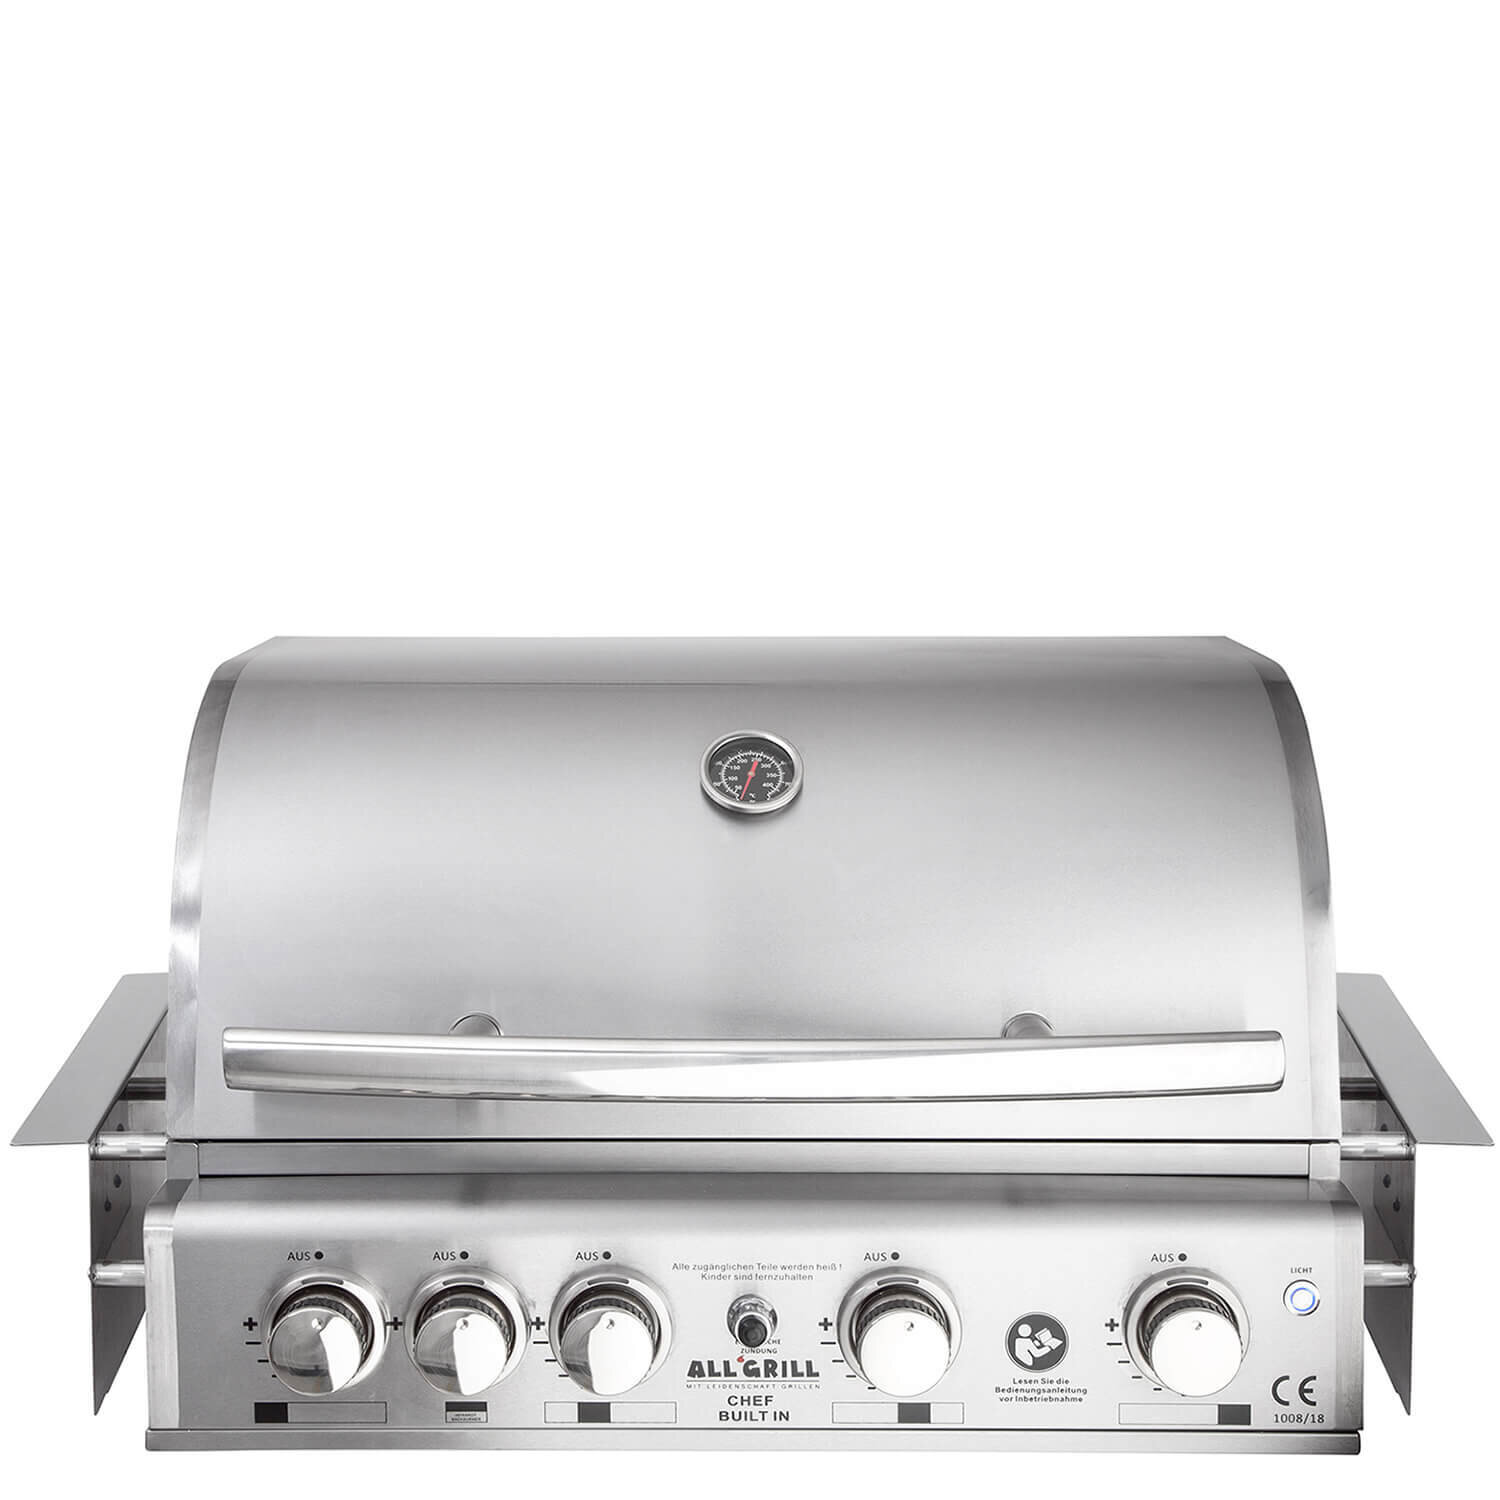 TOP-LINE - ALL'GRILL CHEF L - BUILT-IN mit Air System